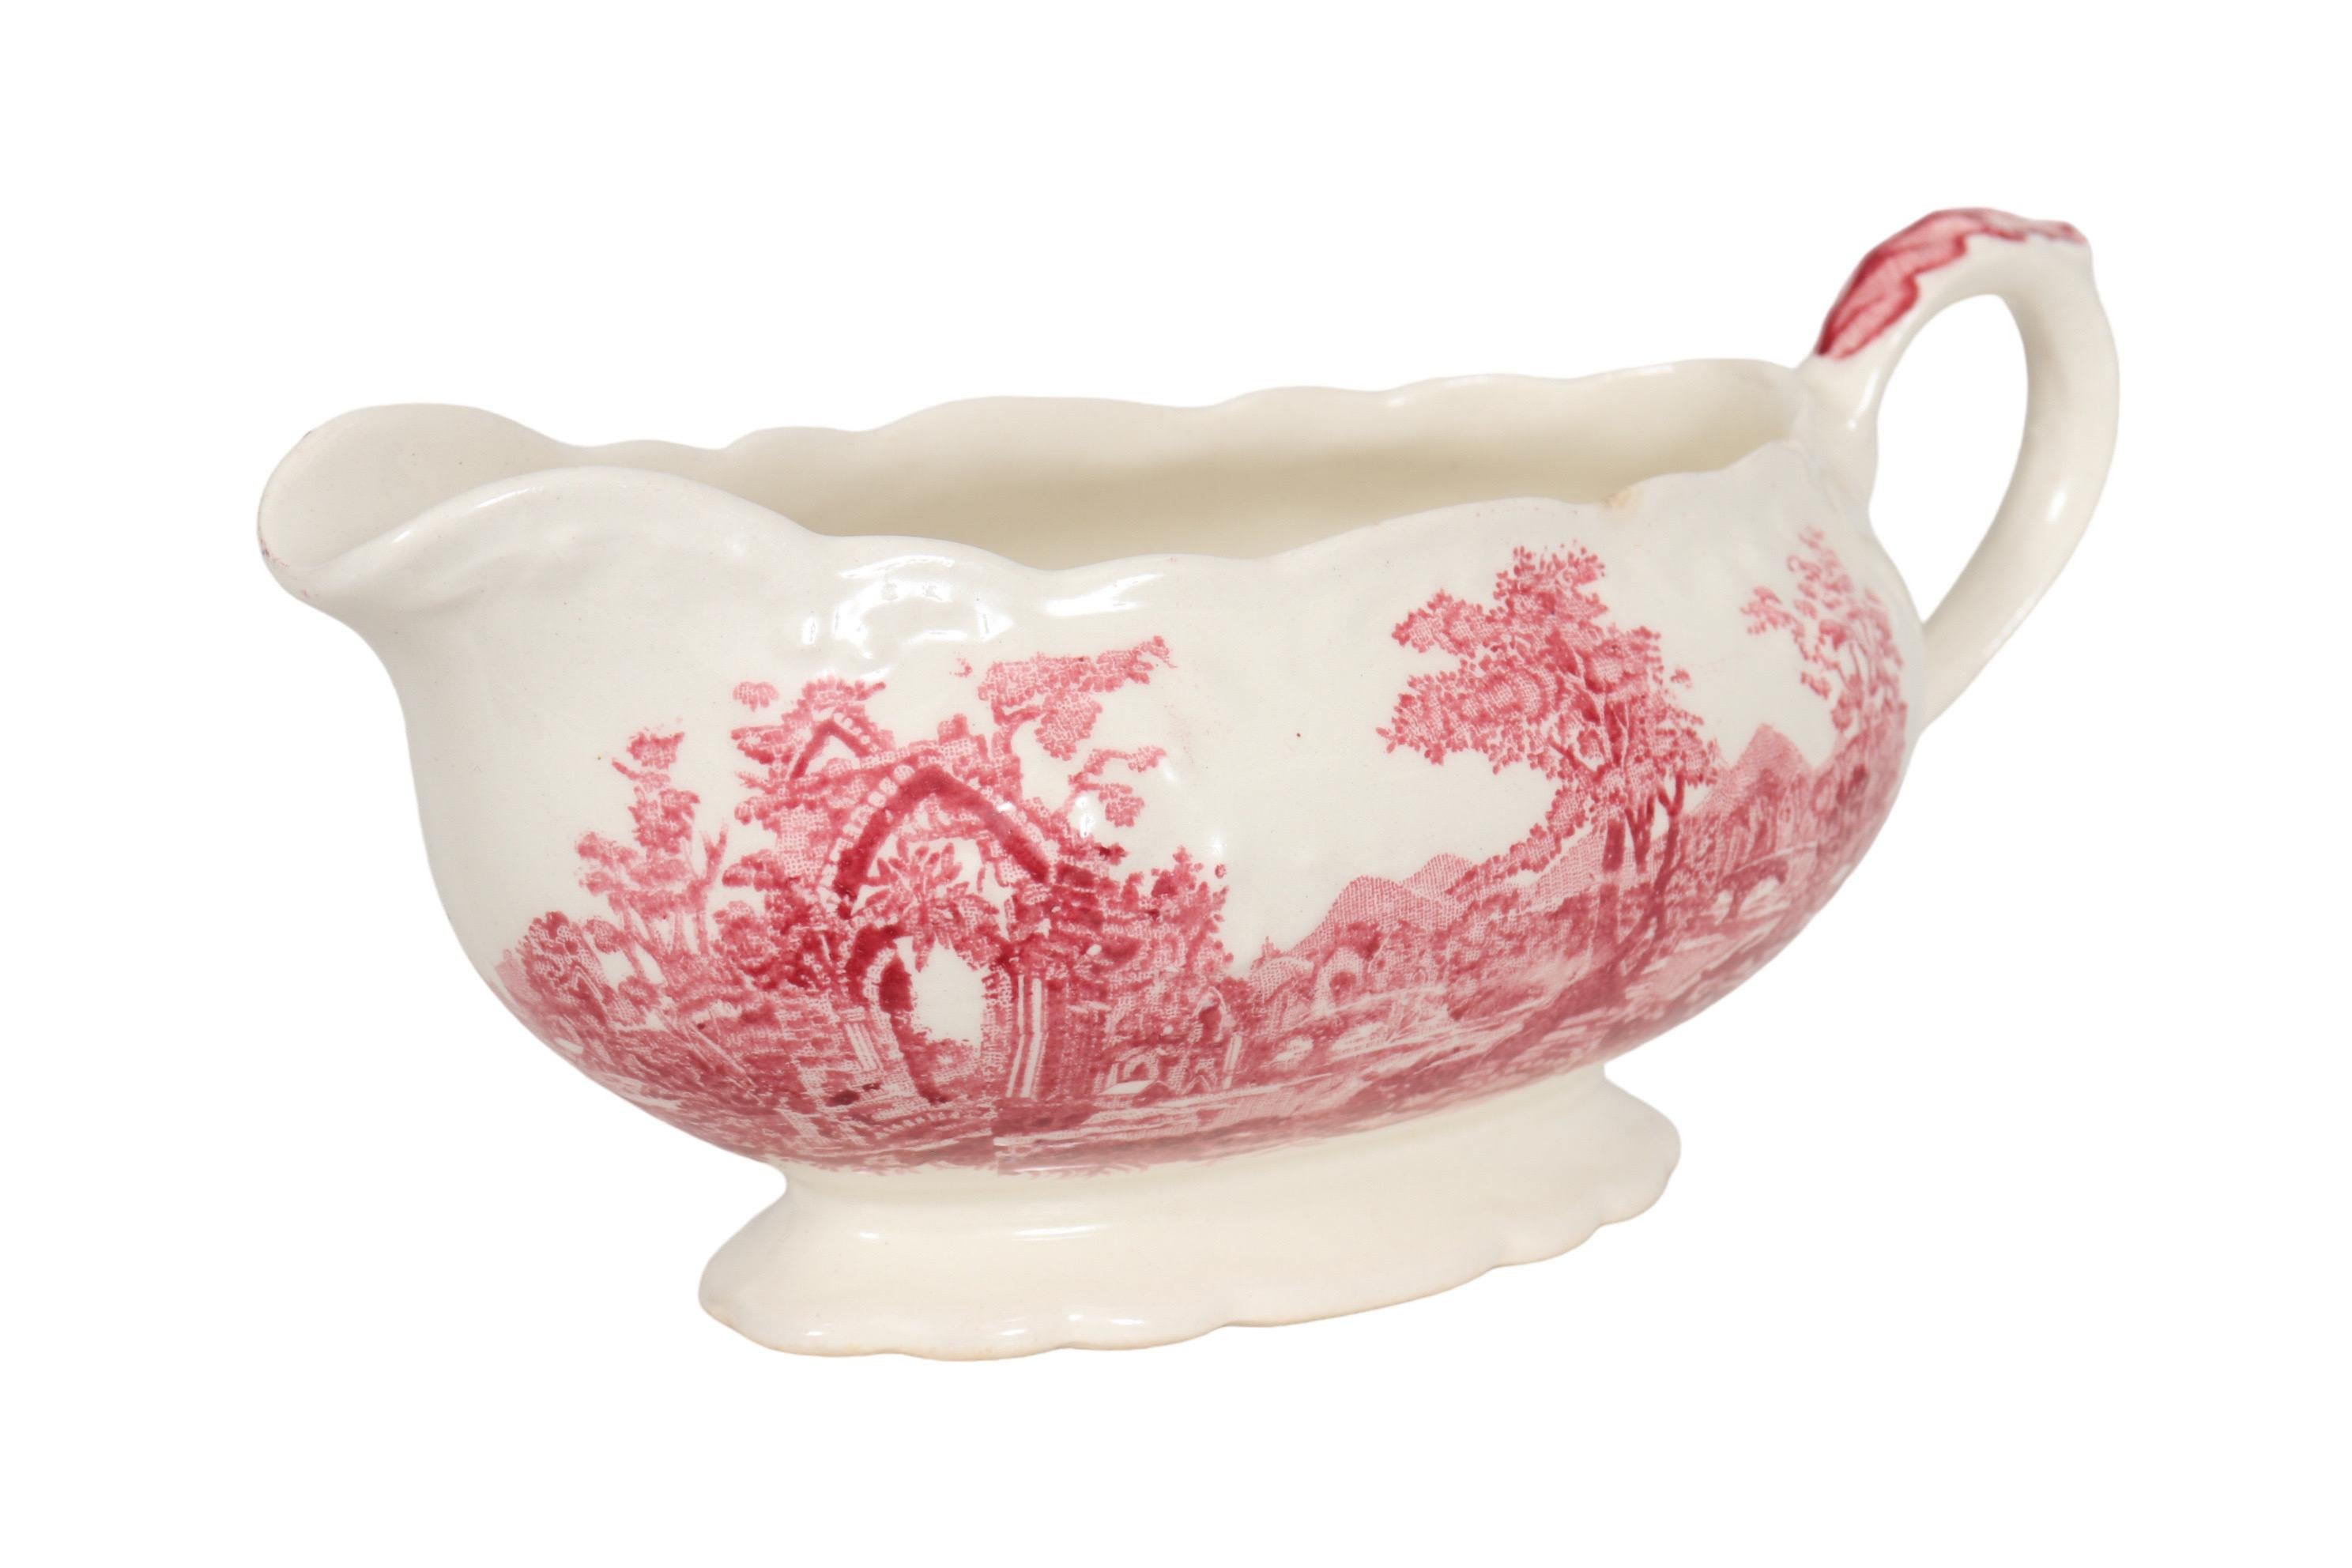 A transferware ceramic gravy boat with a scalloped edge, made by Taylor, Smith & Taylor. Decorated in their red English Abbey pattern. The pattern shows an abbey and trees, beside a river with a bridge. Maker's mark visible underneath.